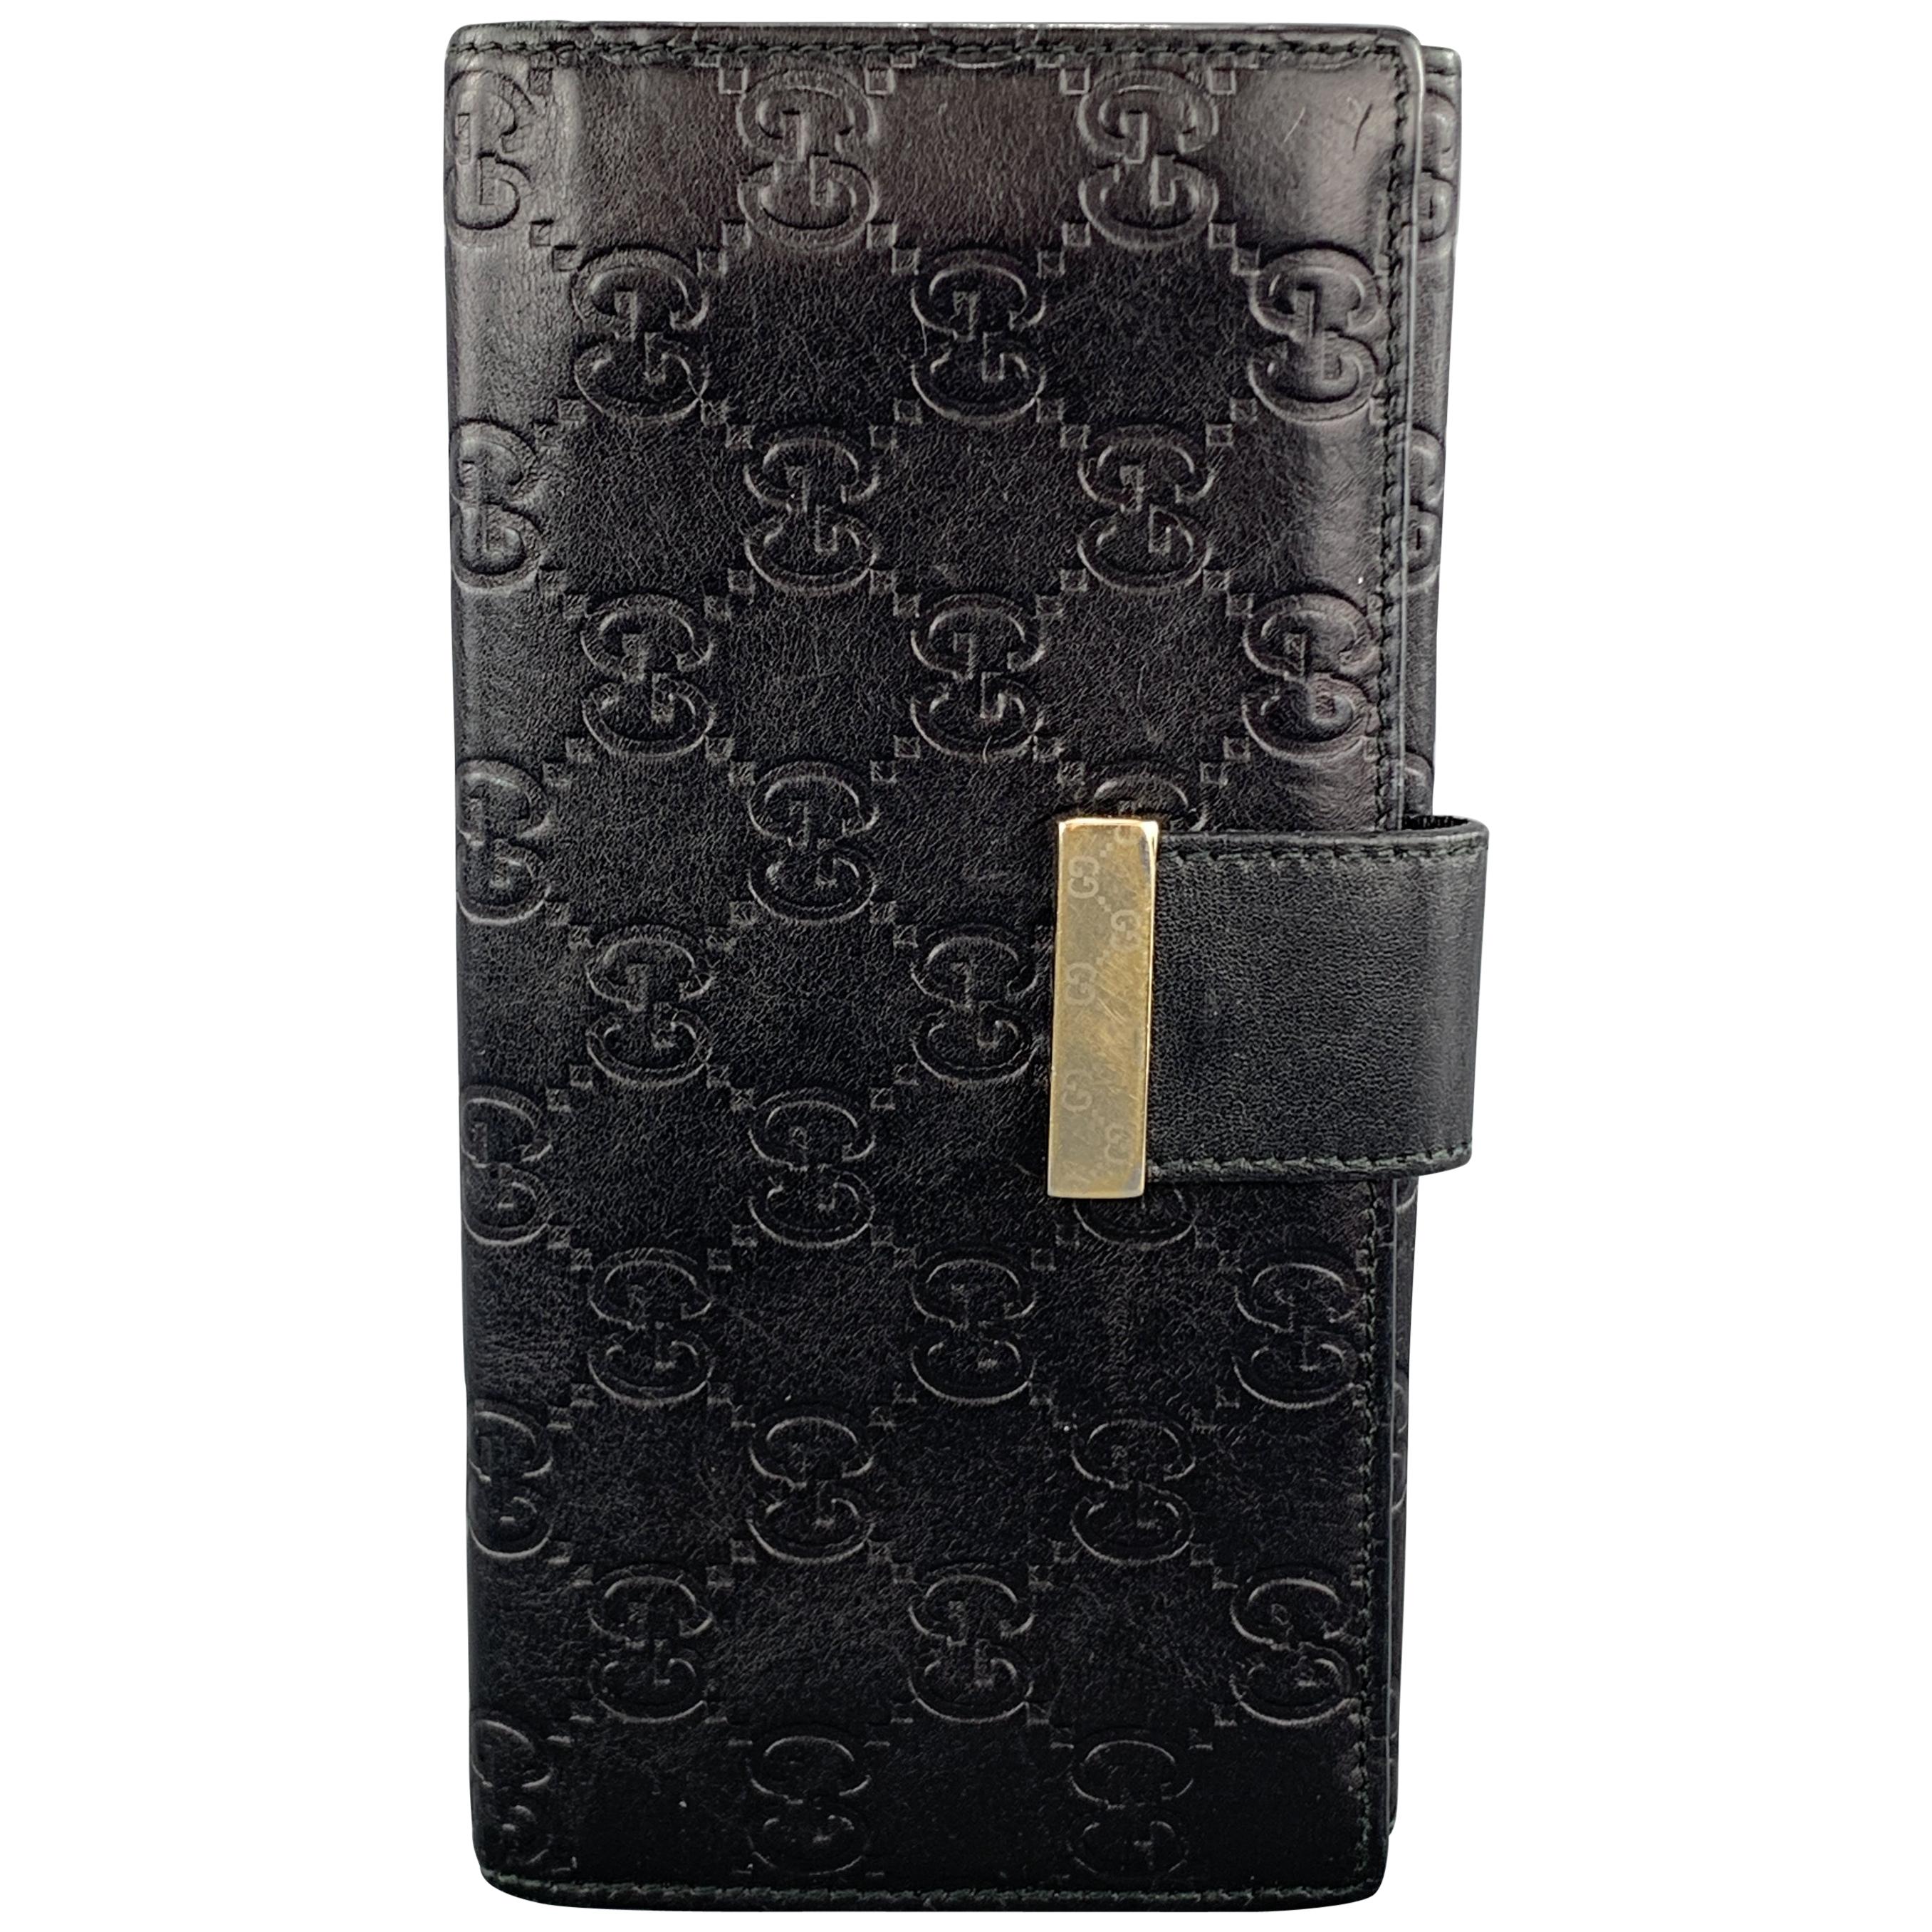 Gucci Vintage Checkbook Cover Wallet - Black Wallets, Accessories -  GUC838884